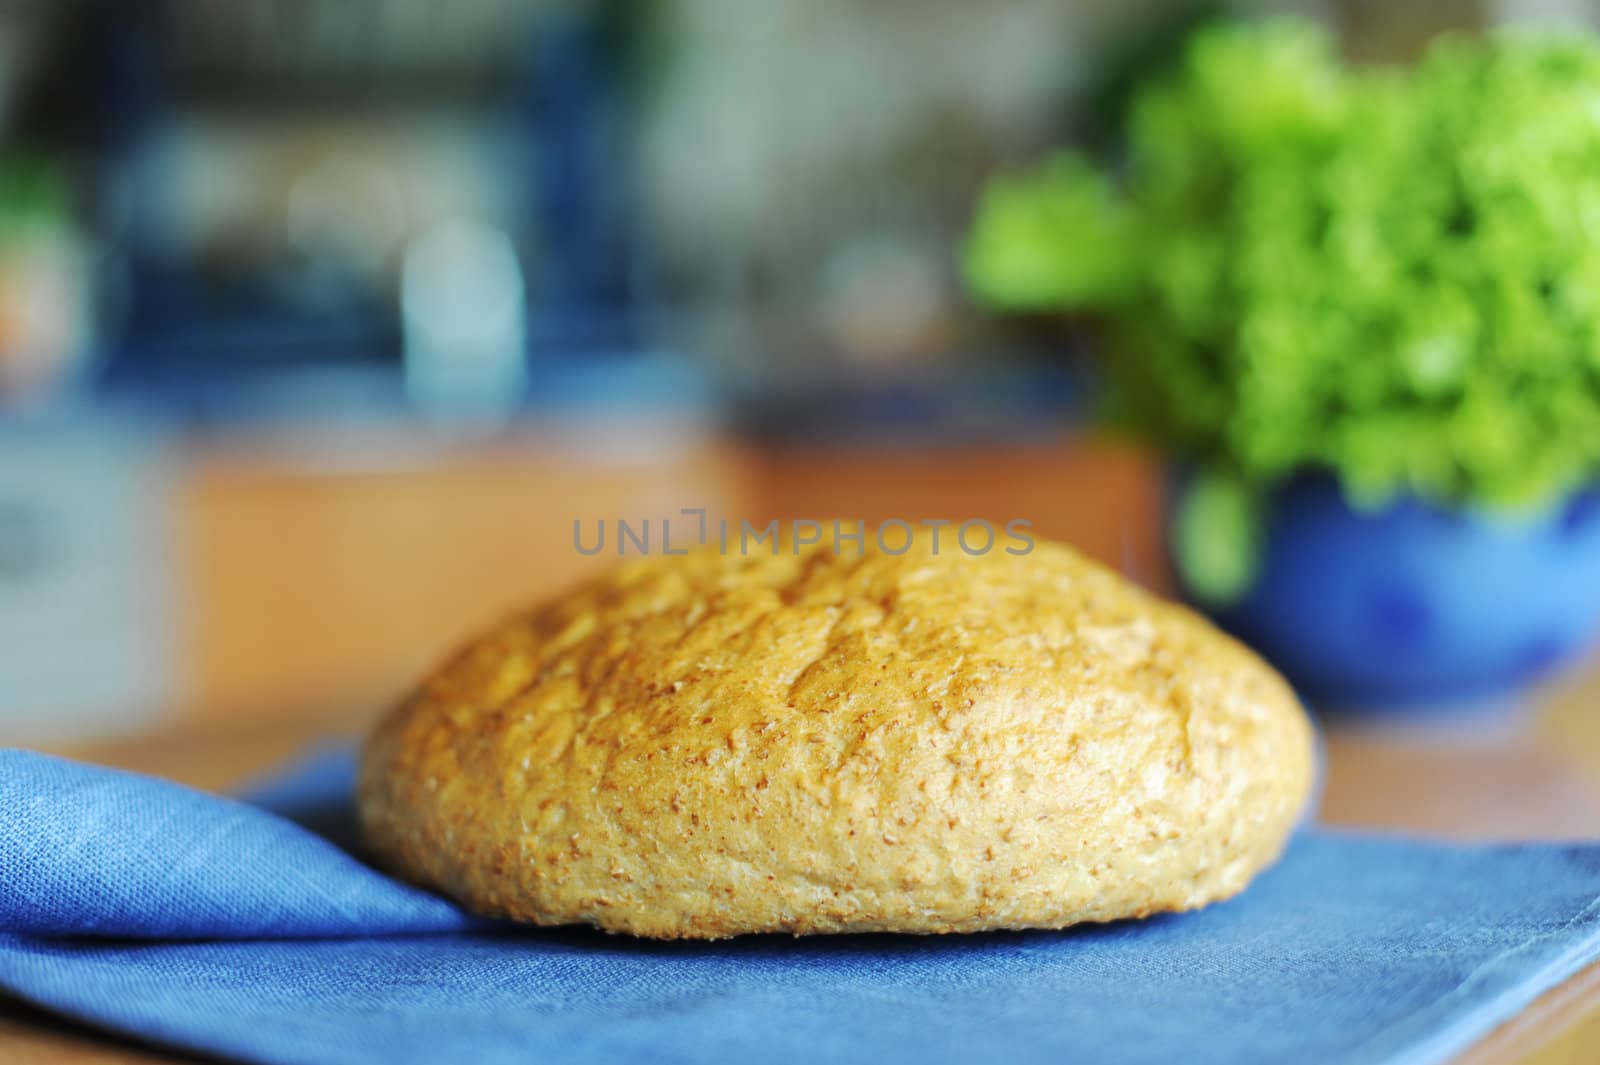 An image of a loaf of fresh bread on a napkin